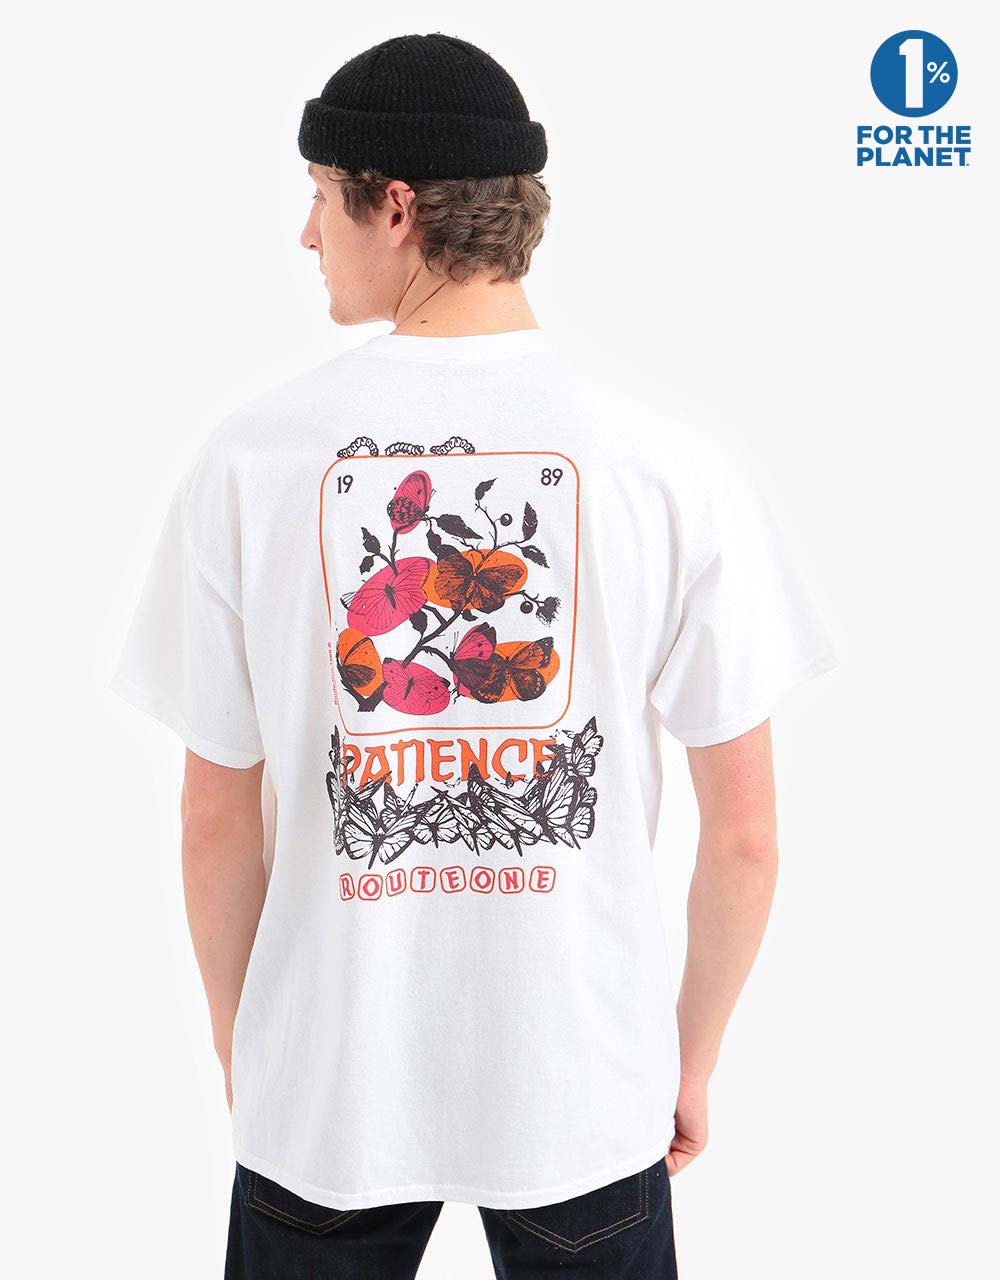 Route One Patience T-Shirt - White